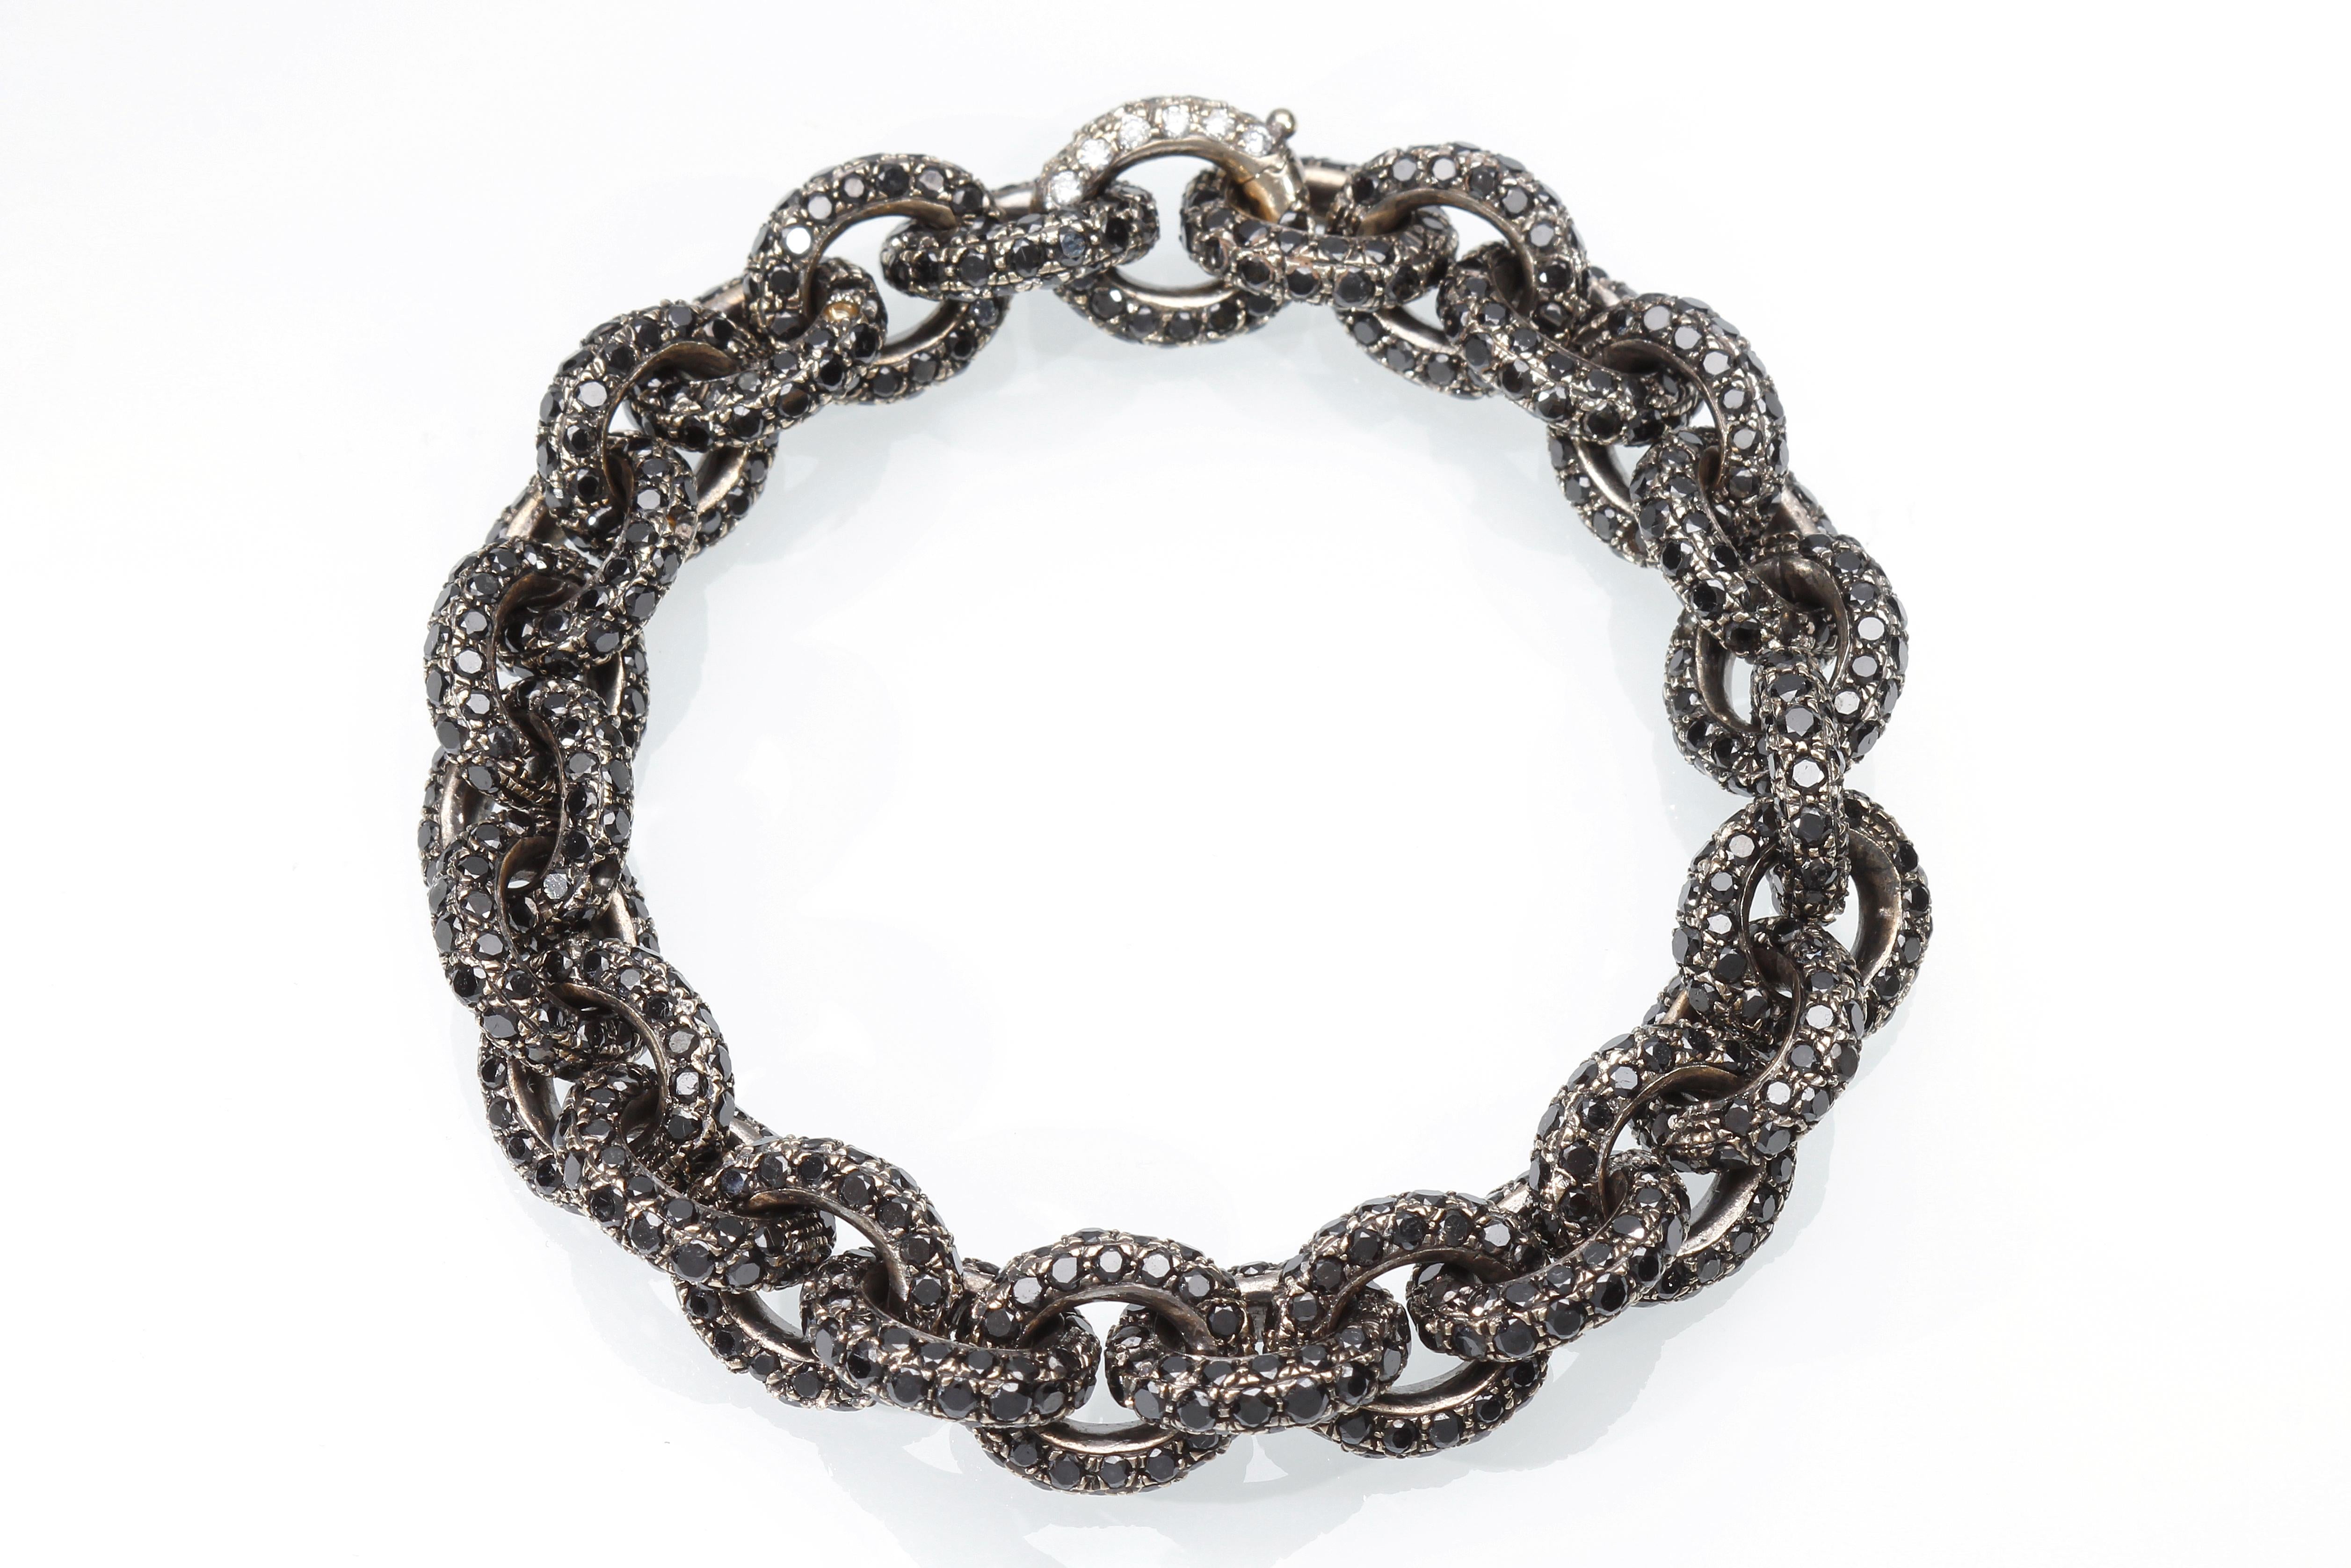 Brilliant Cut Chain Necklace/Bracelet with 64.26 Ct of White and Black Diamonds. Handmade. For Sale